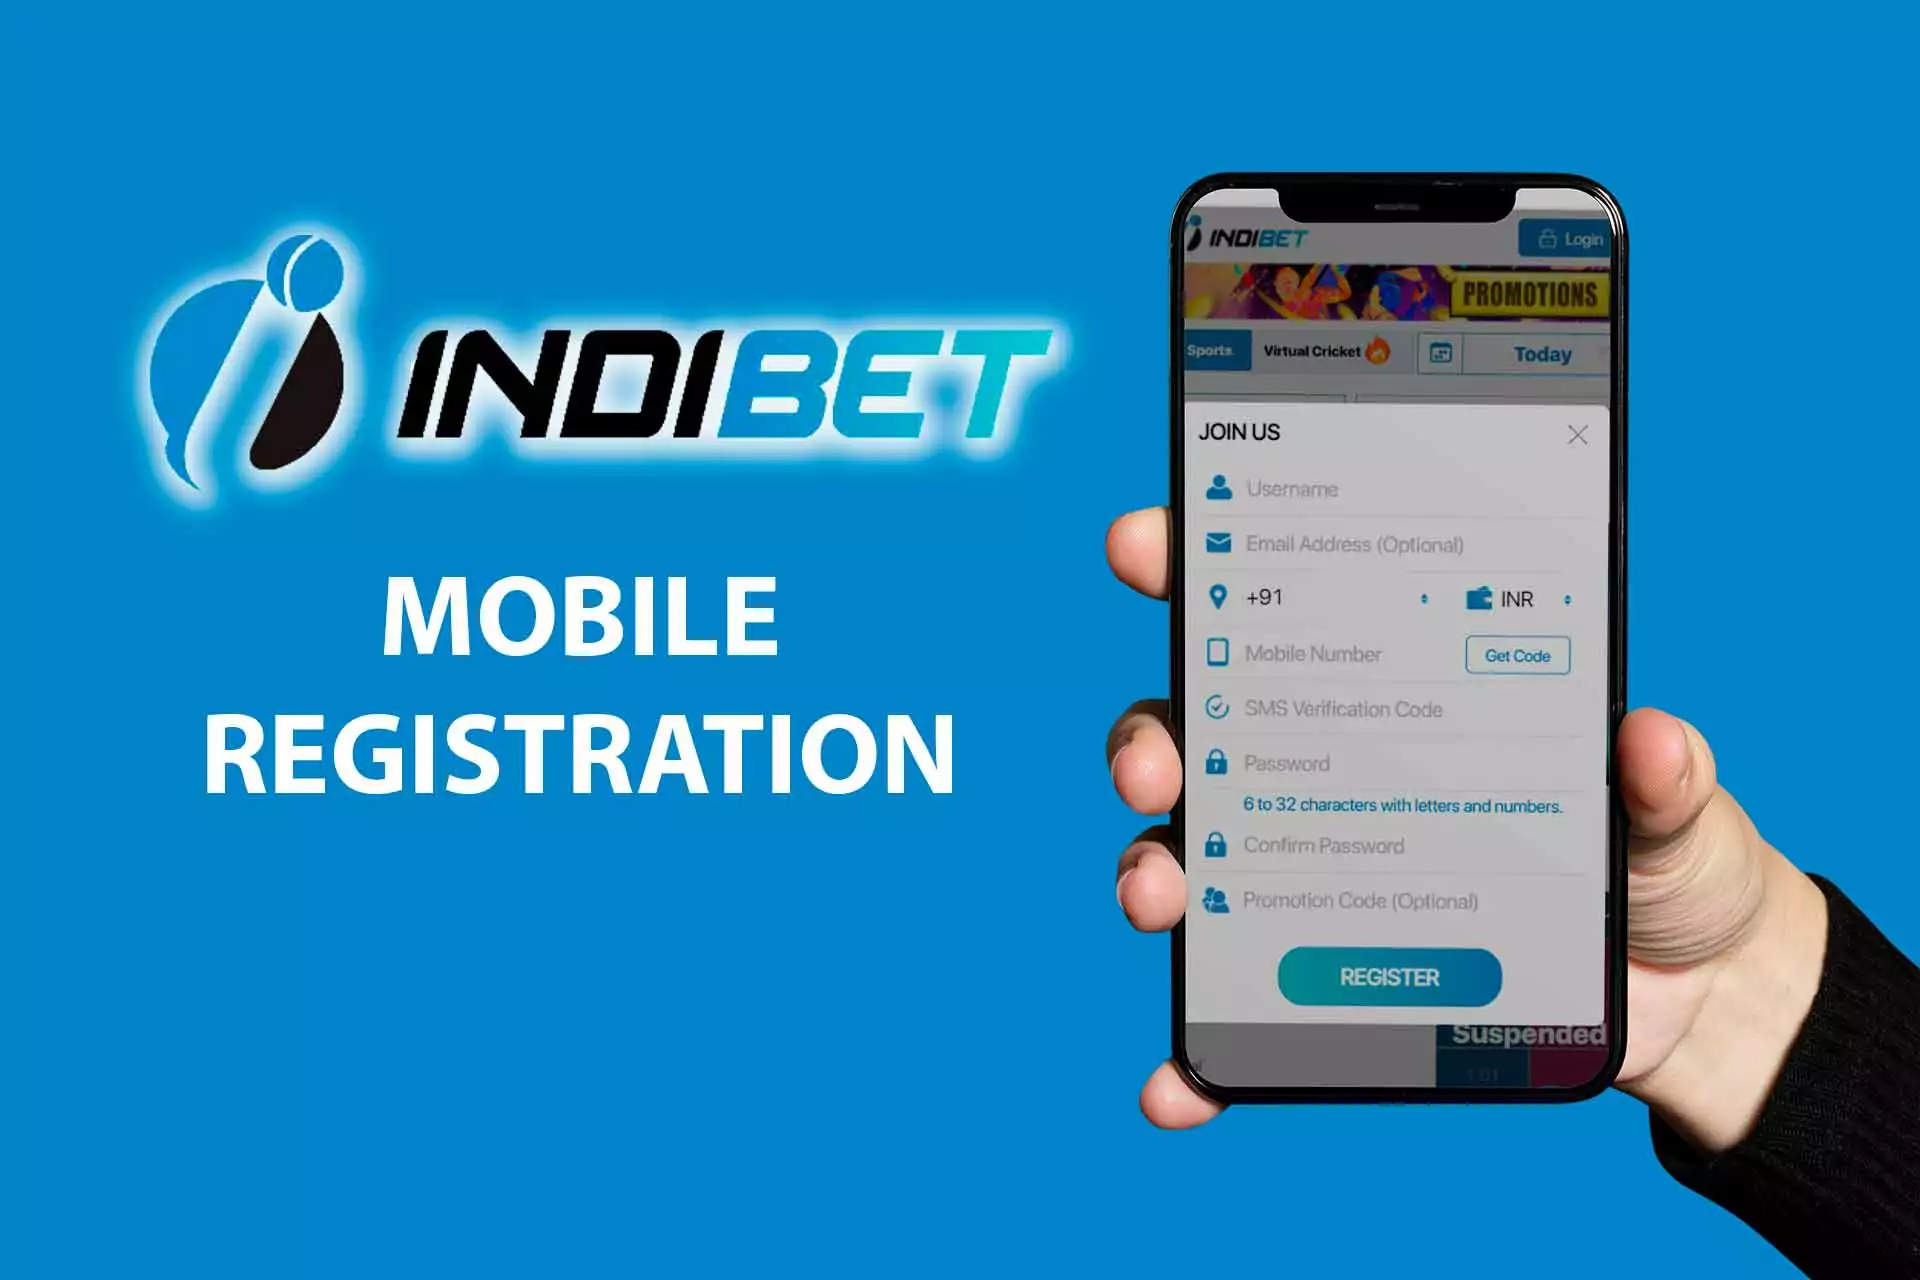 You can download the Indibet app and register there.